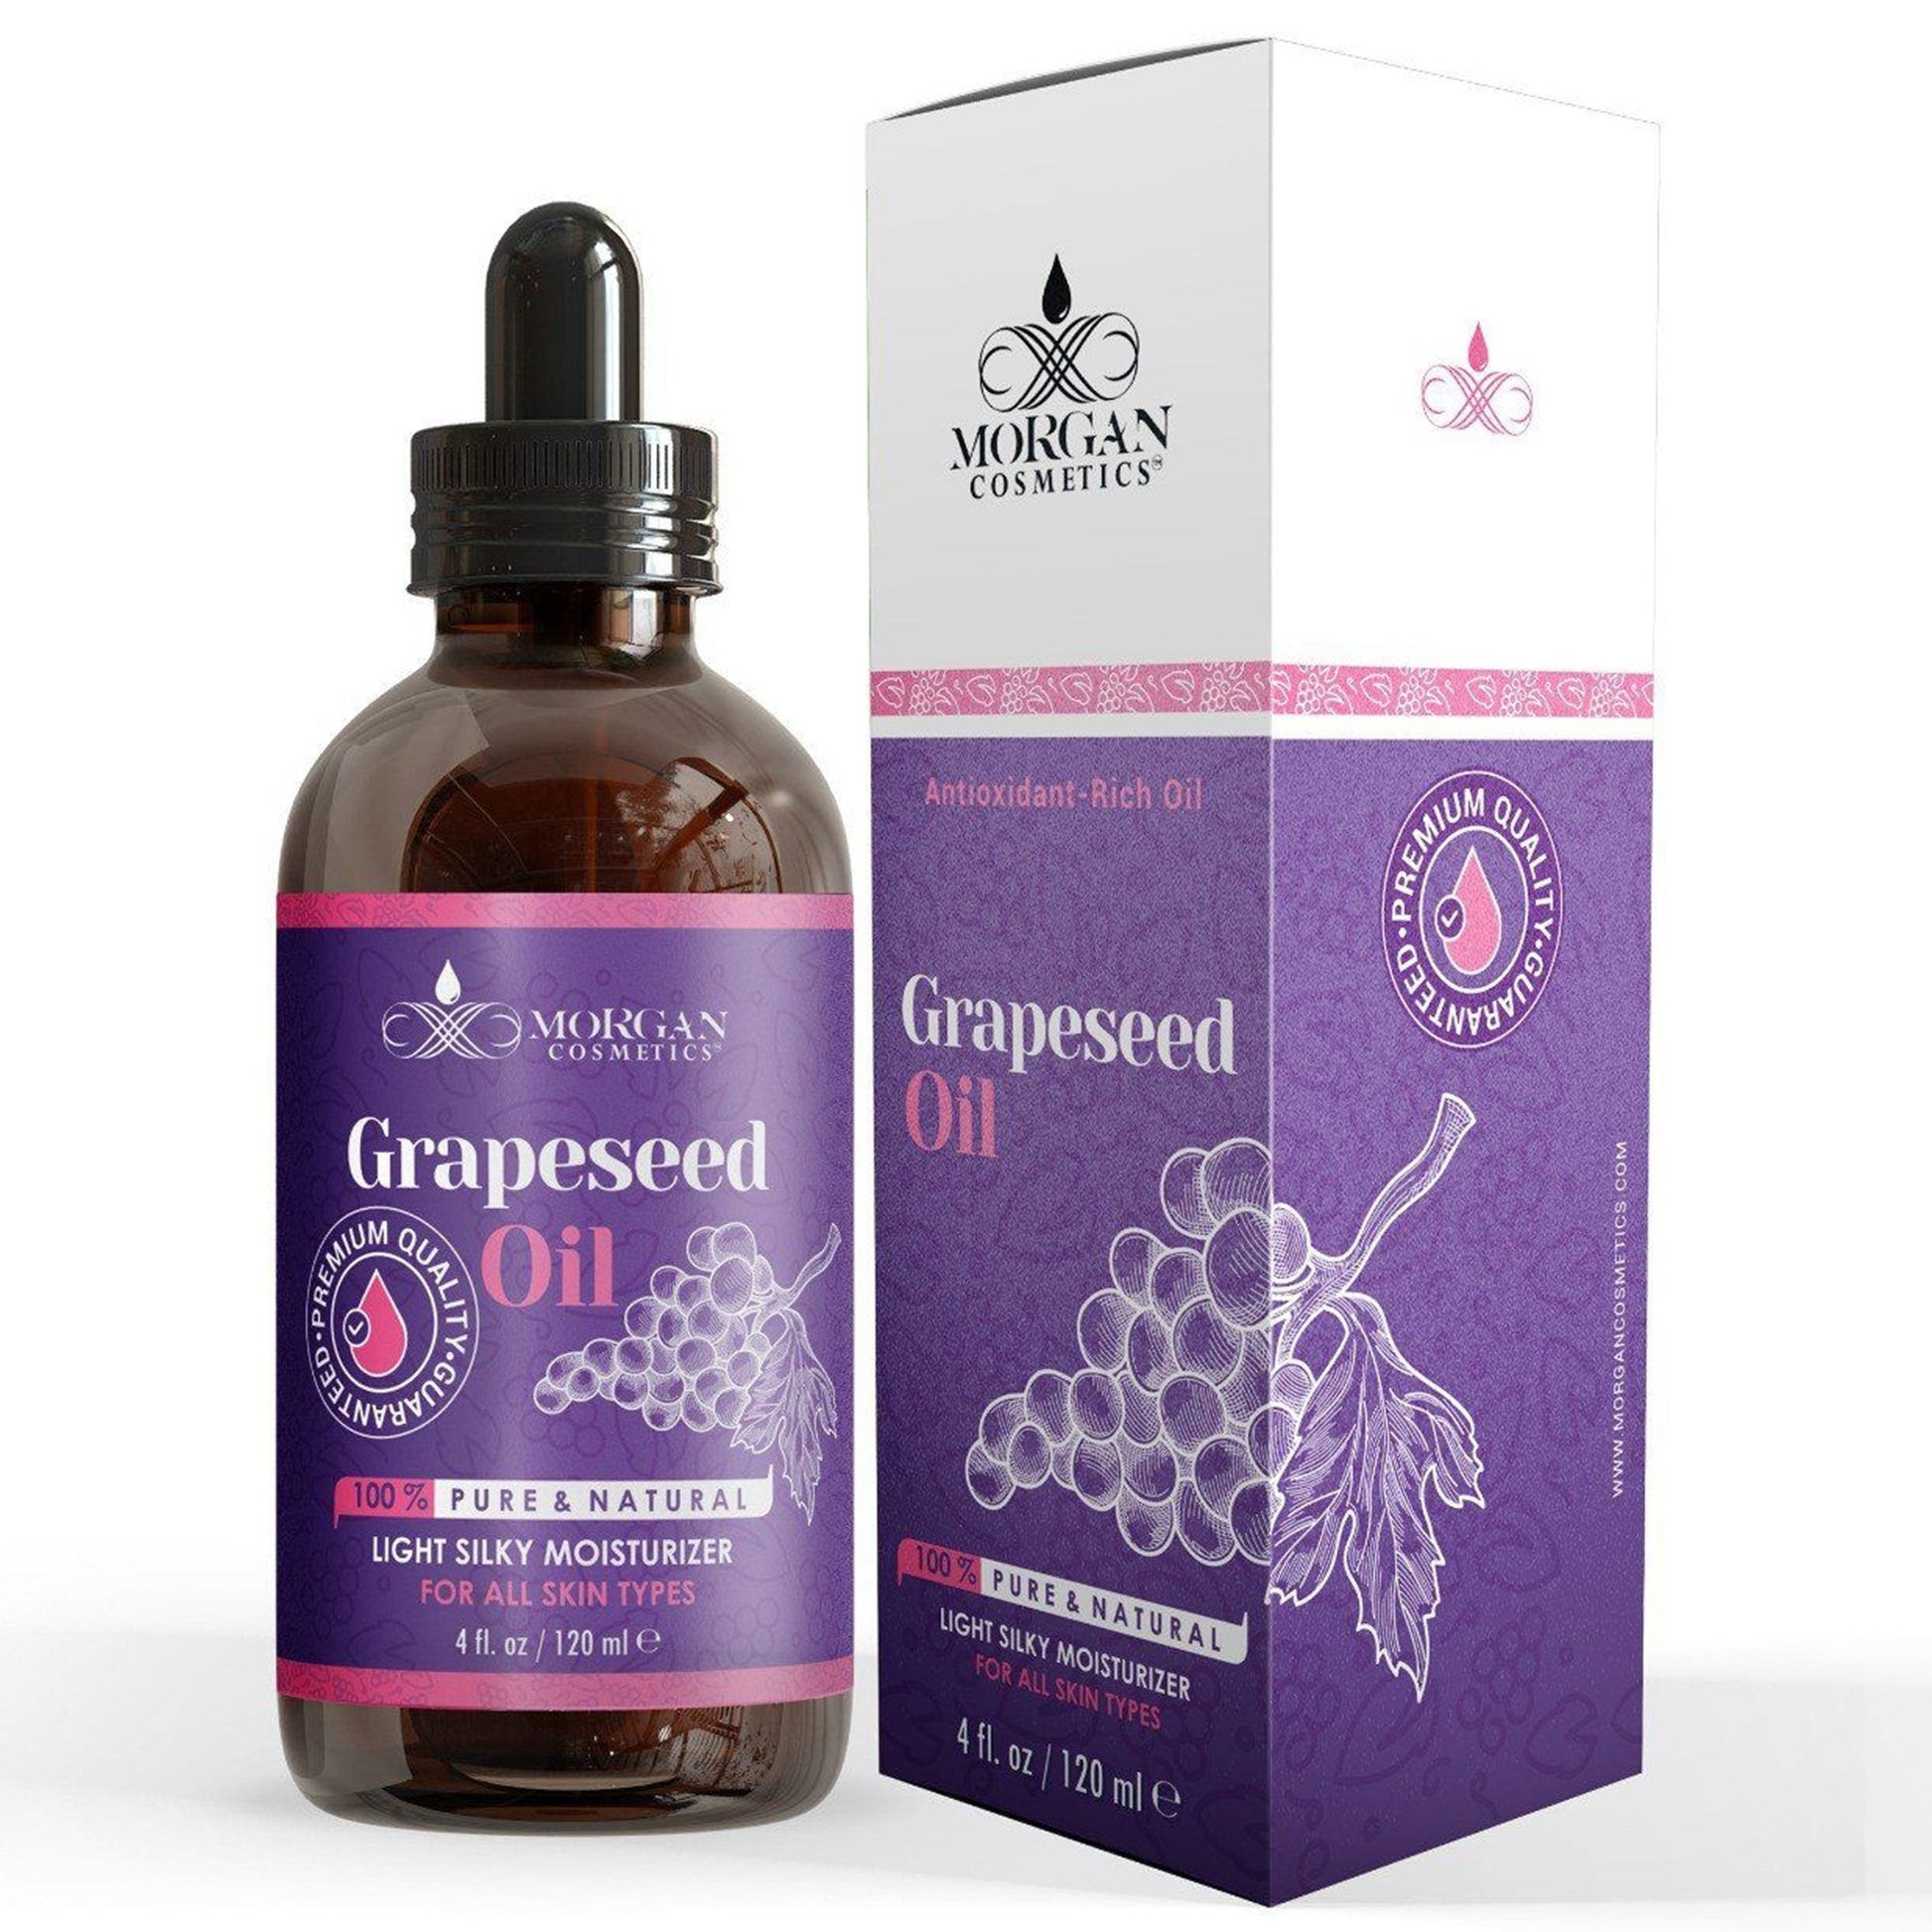 100% Pure Grapeseed Oil Antioxidant-rich Oil For all Skin types 4 fl oz 118 ml freeshipping - morgancosmeticsofficial